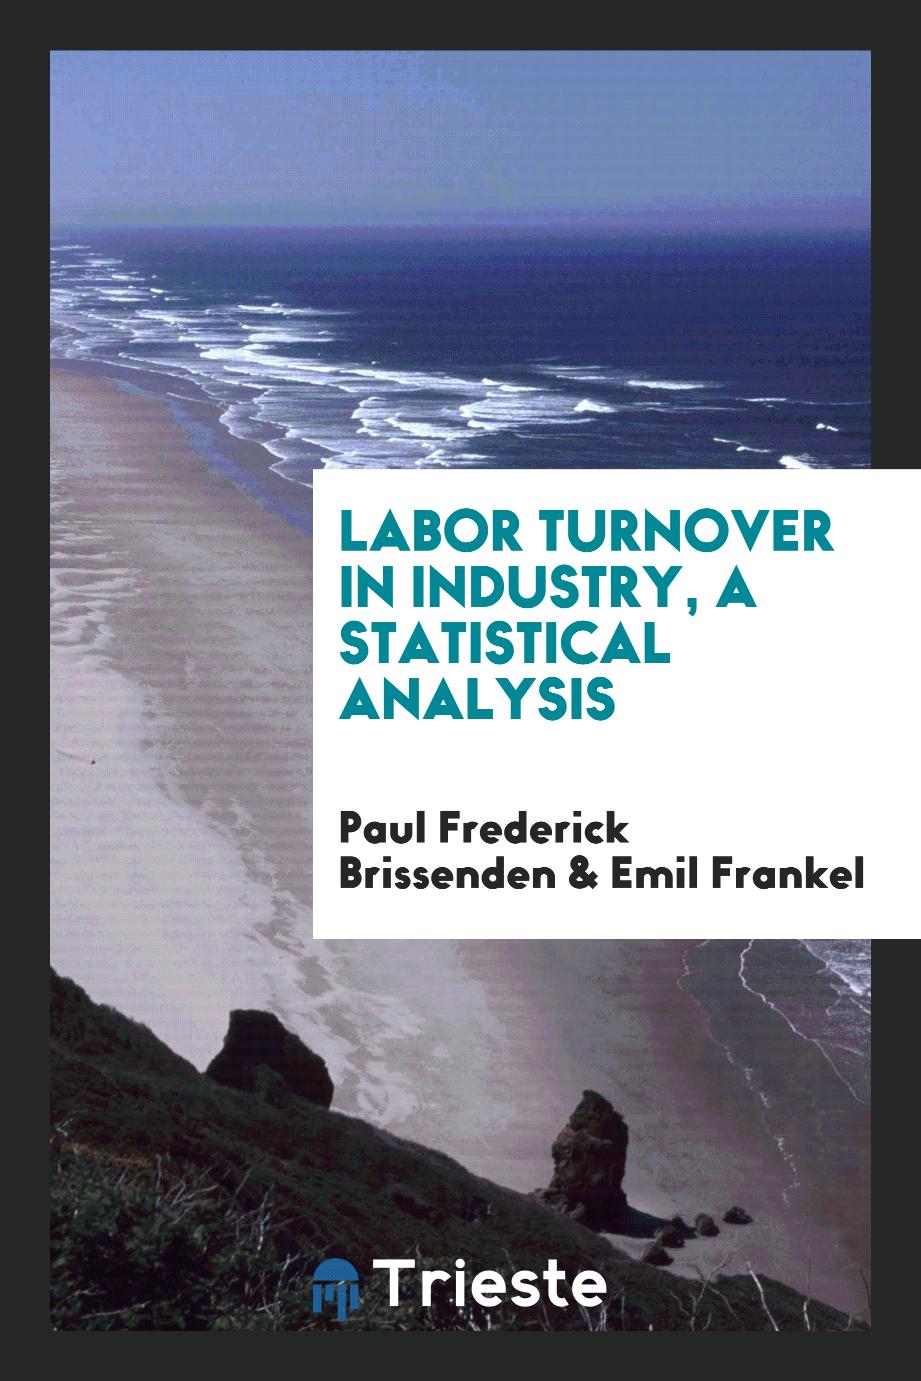 Labor turnover in industry, a statistical analysis